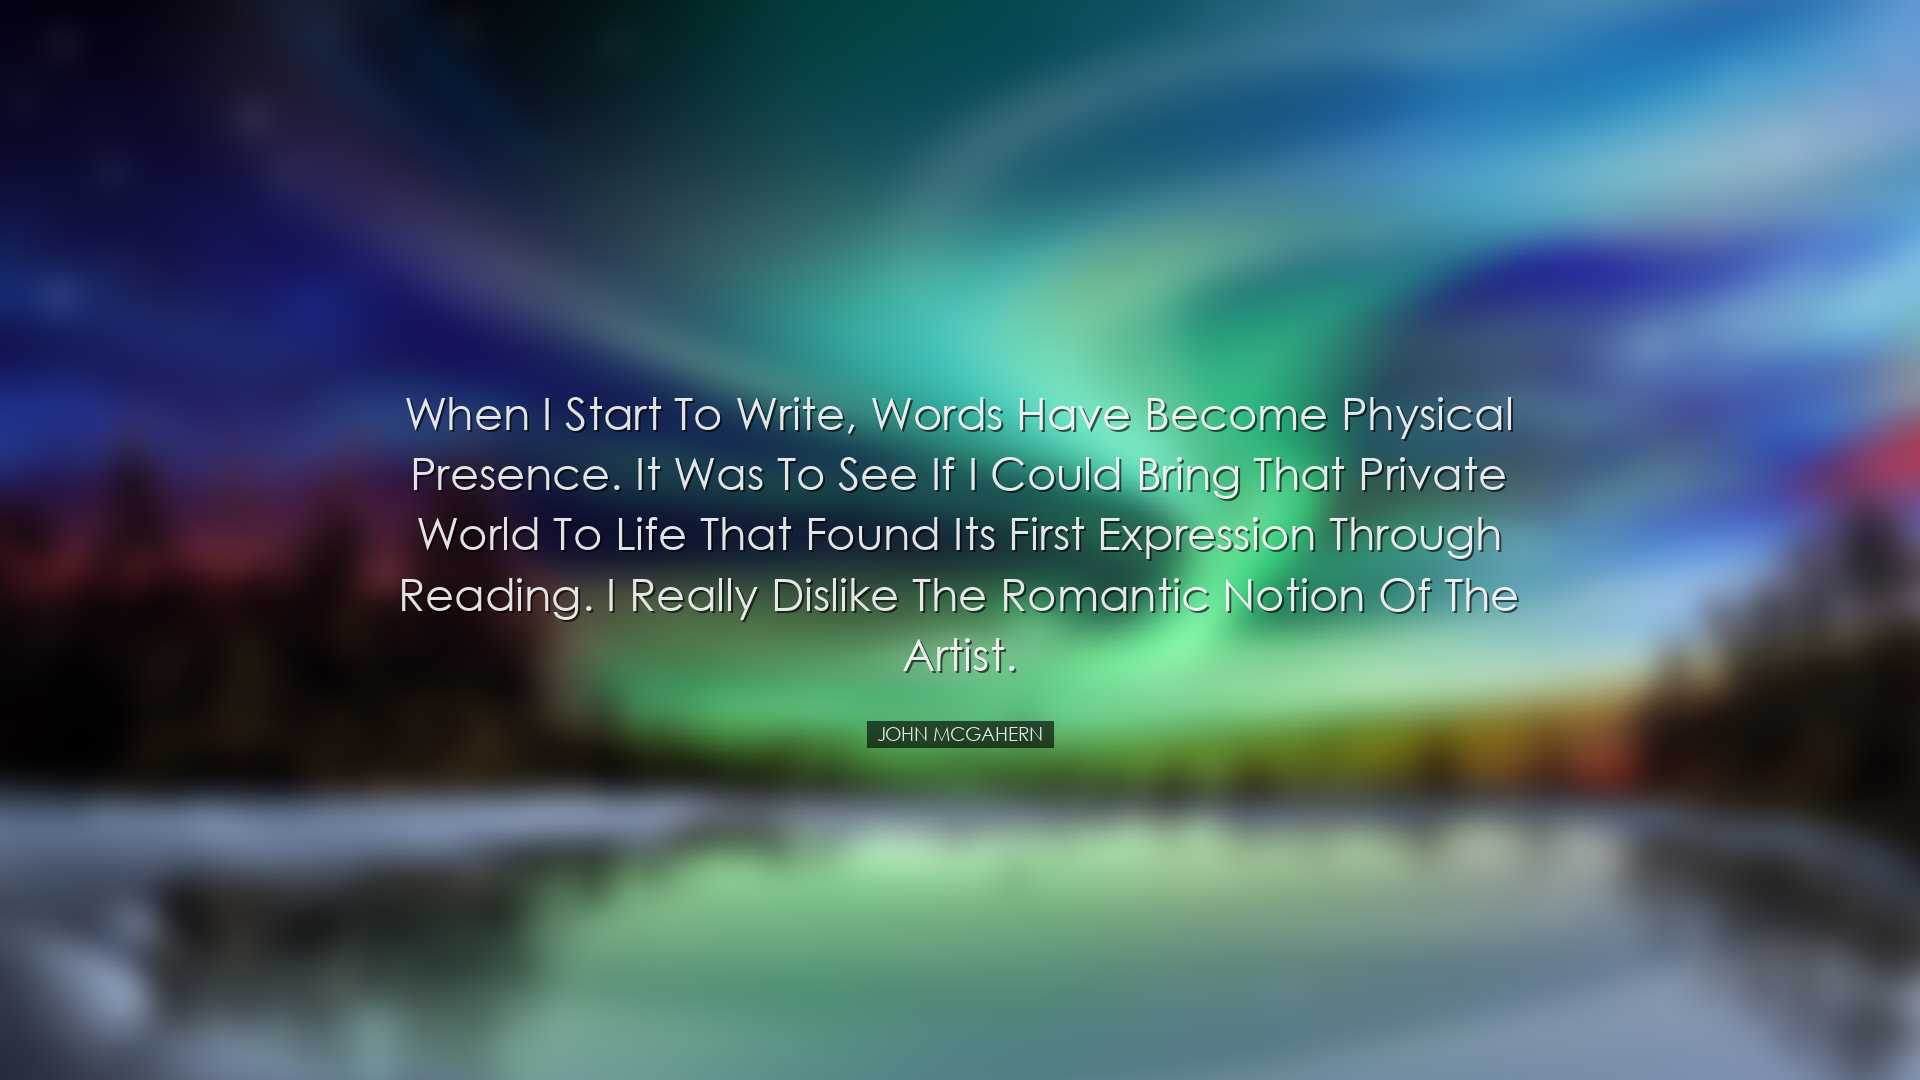 When I start to write, words have become physical presence. It was